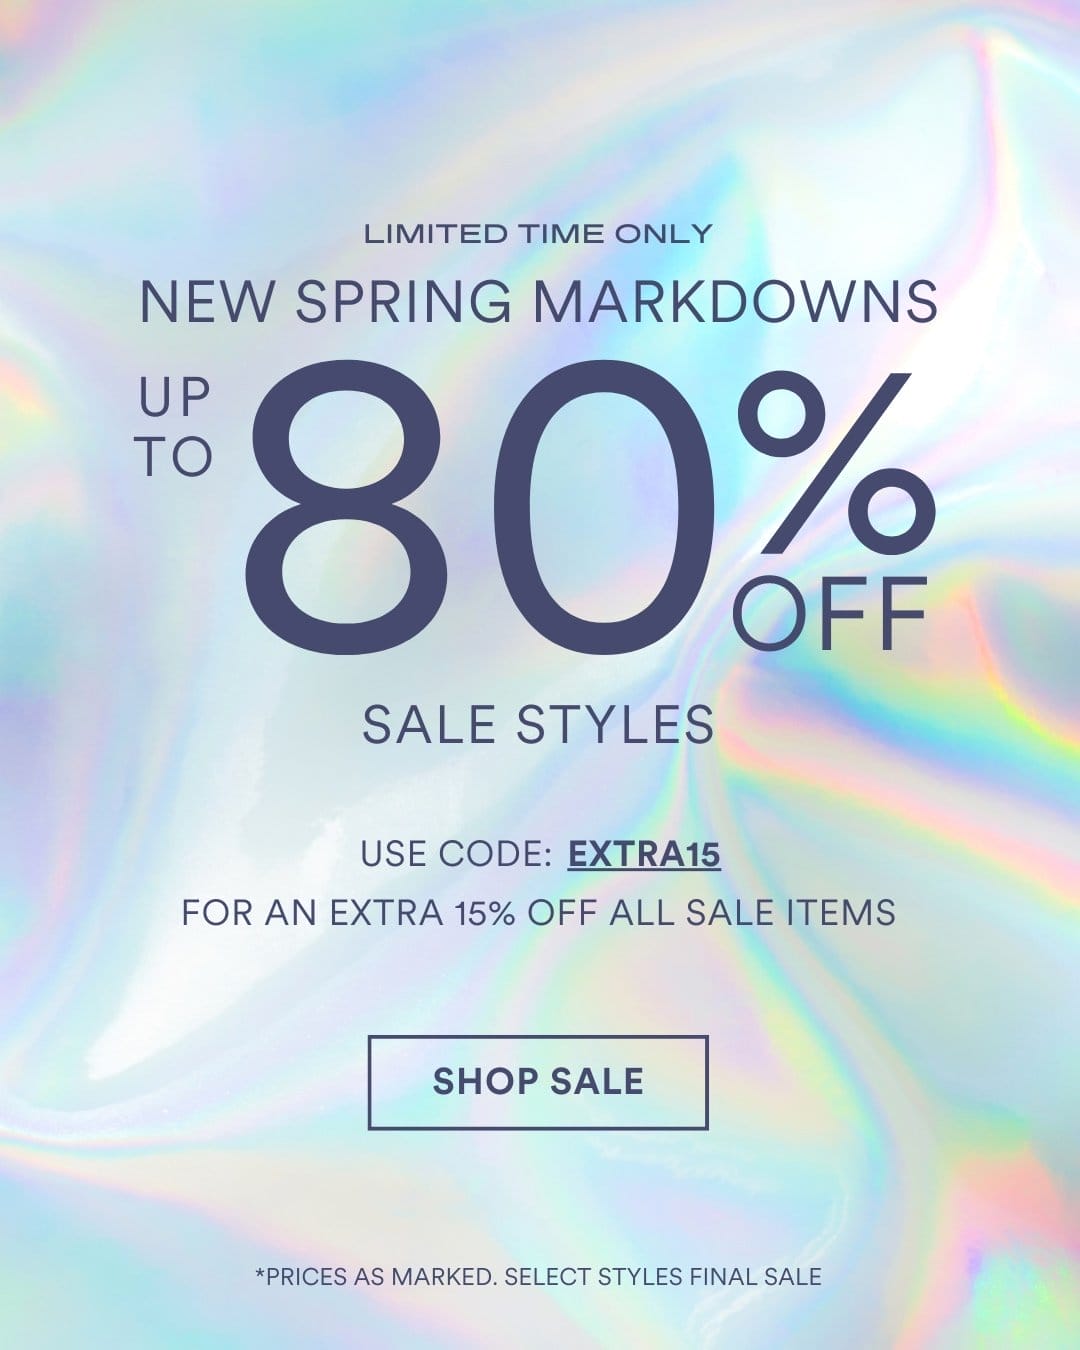 SHOP SALE UP TO 80 % OFF SALE STYLES NEW SPRING MARKDOWNS *PRICES AS MARKED. SELECT STYLES FINAL SALE LIMITED TIME ONLY. SAVE EXTRA 15% OFF WITH CODE EXTRA15